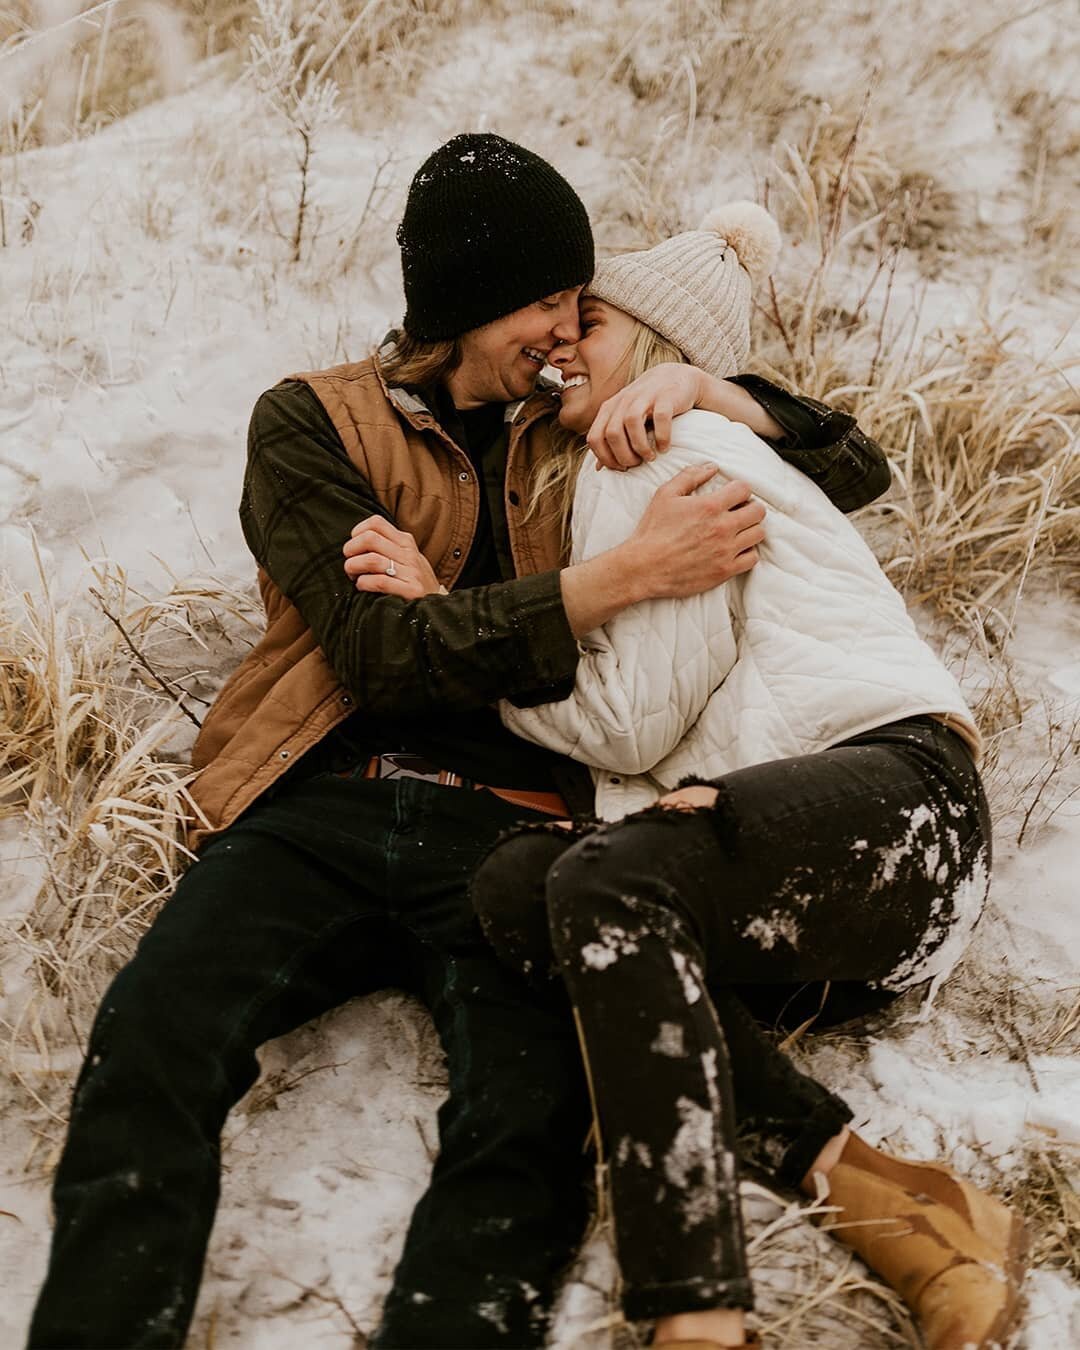 Okay but how freaking CUTE are Lexi and Clay?! 😍 Had the most fun, snow-filled session yesterday morning that totally brought me out of my post Christmas blues. I hope everyone had a magical Christmas weekend, regardless of how different things migh